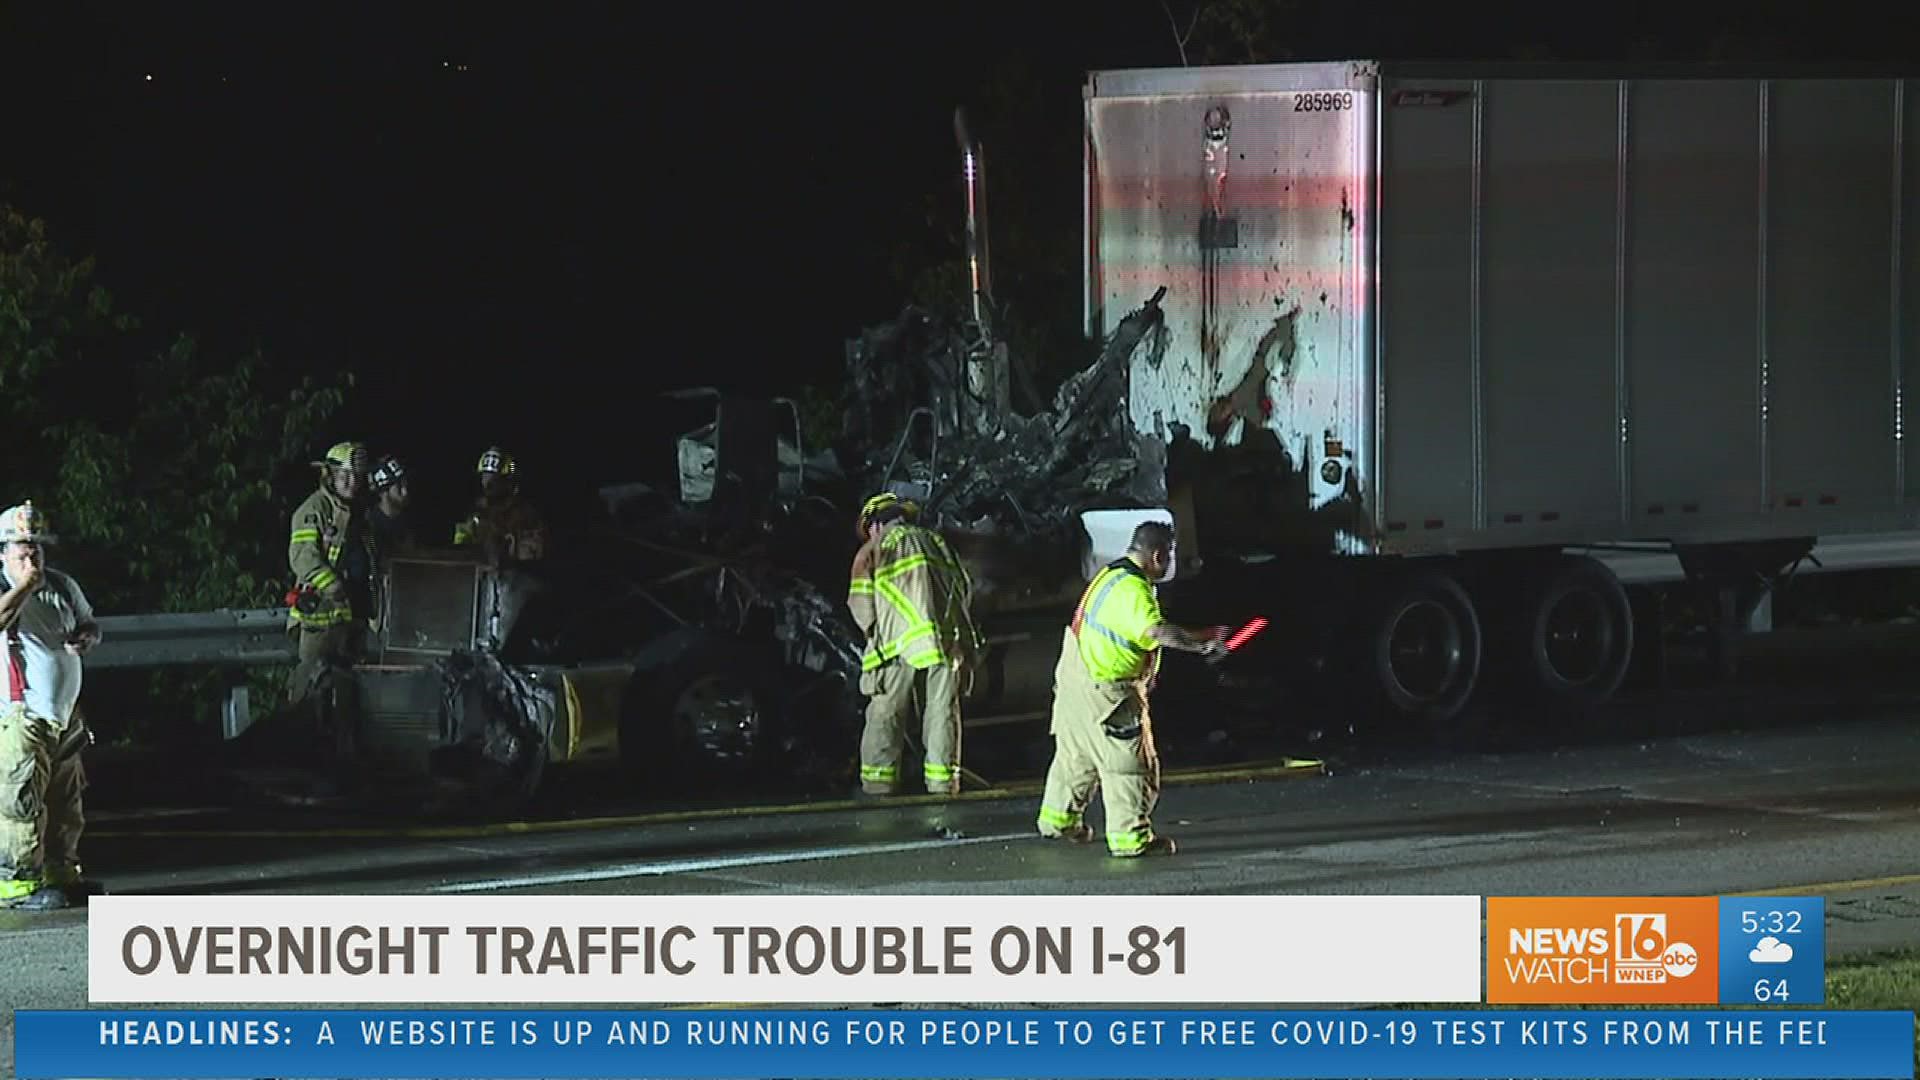 Tractor-trailer fire caused backups on 81